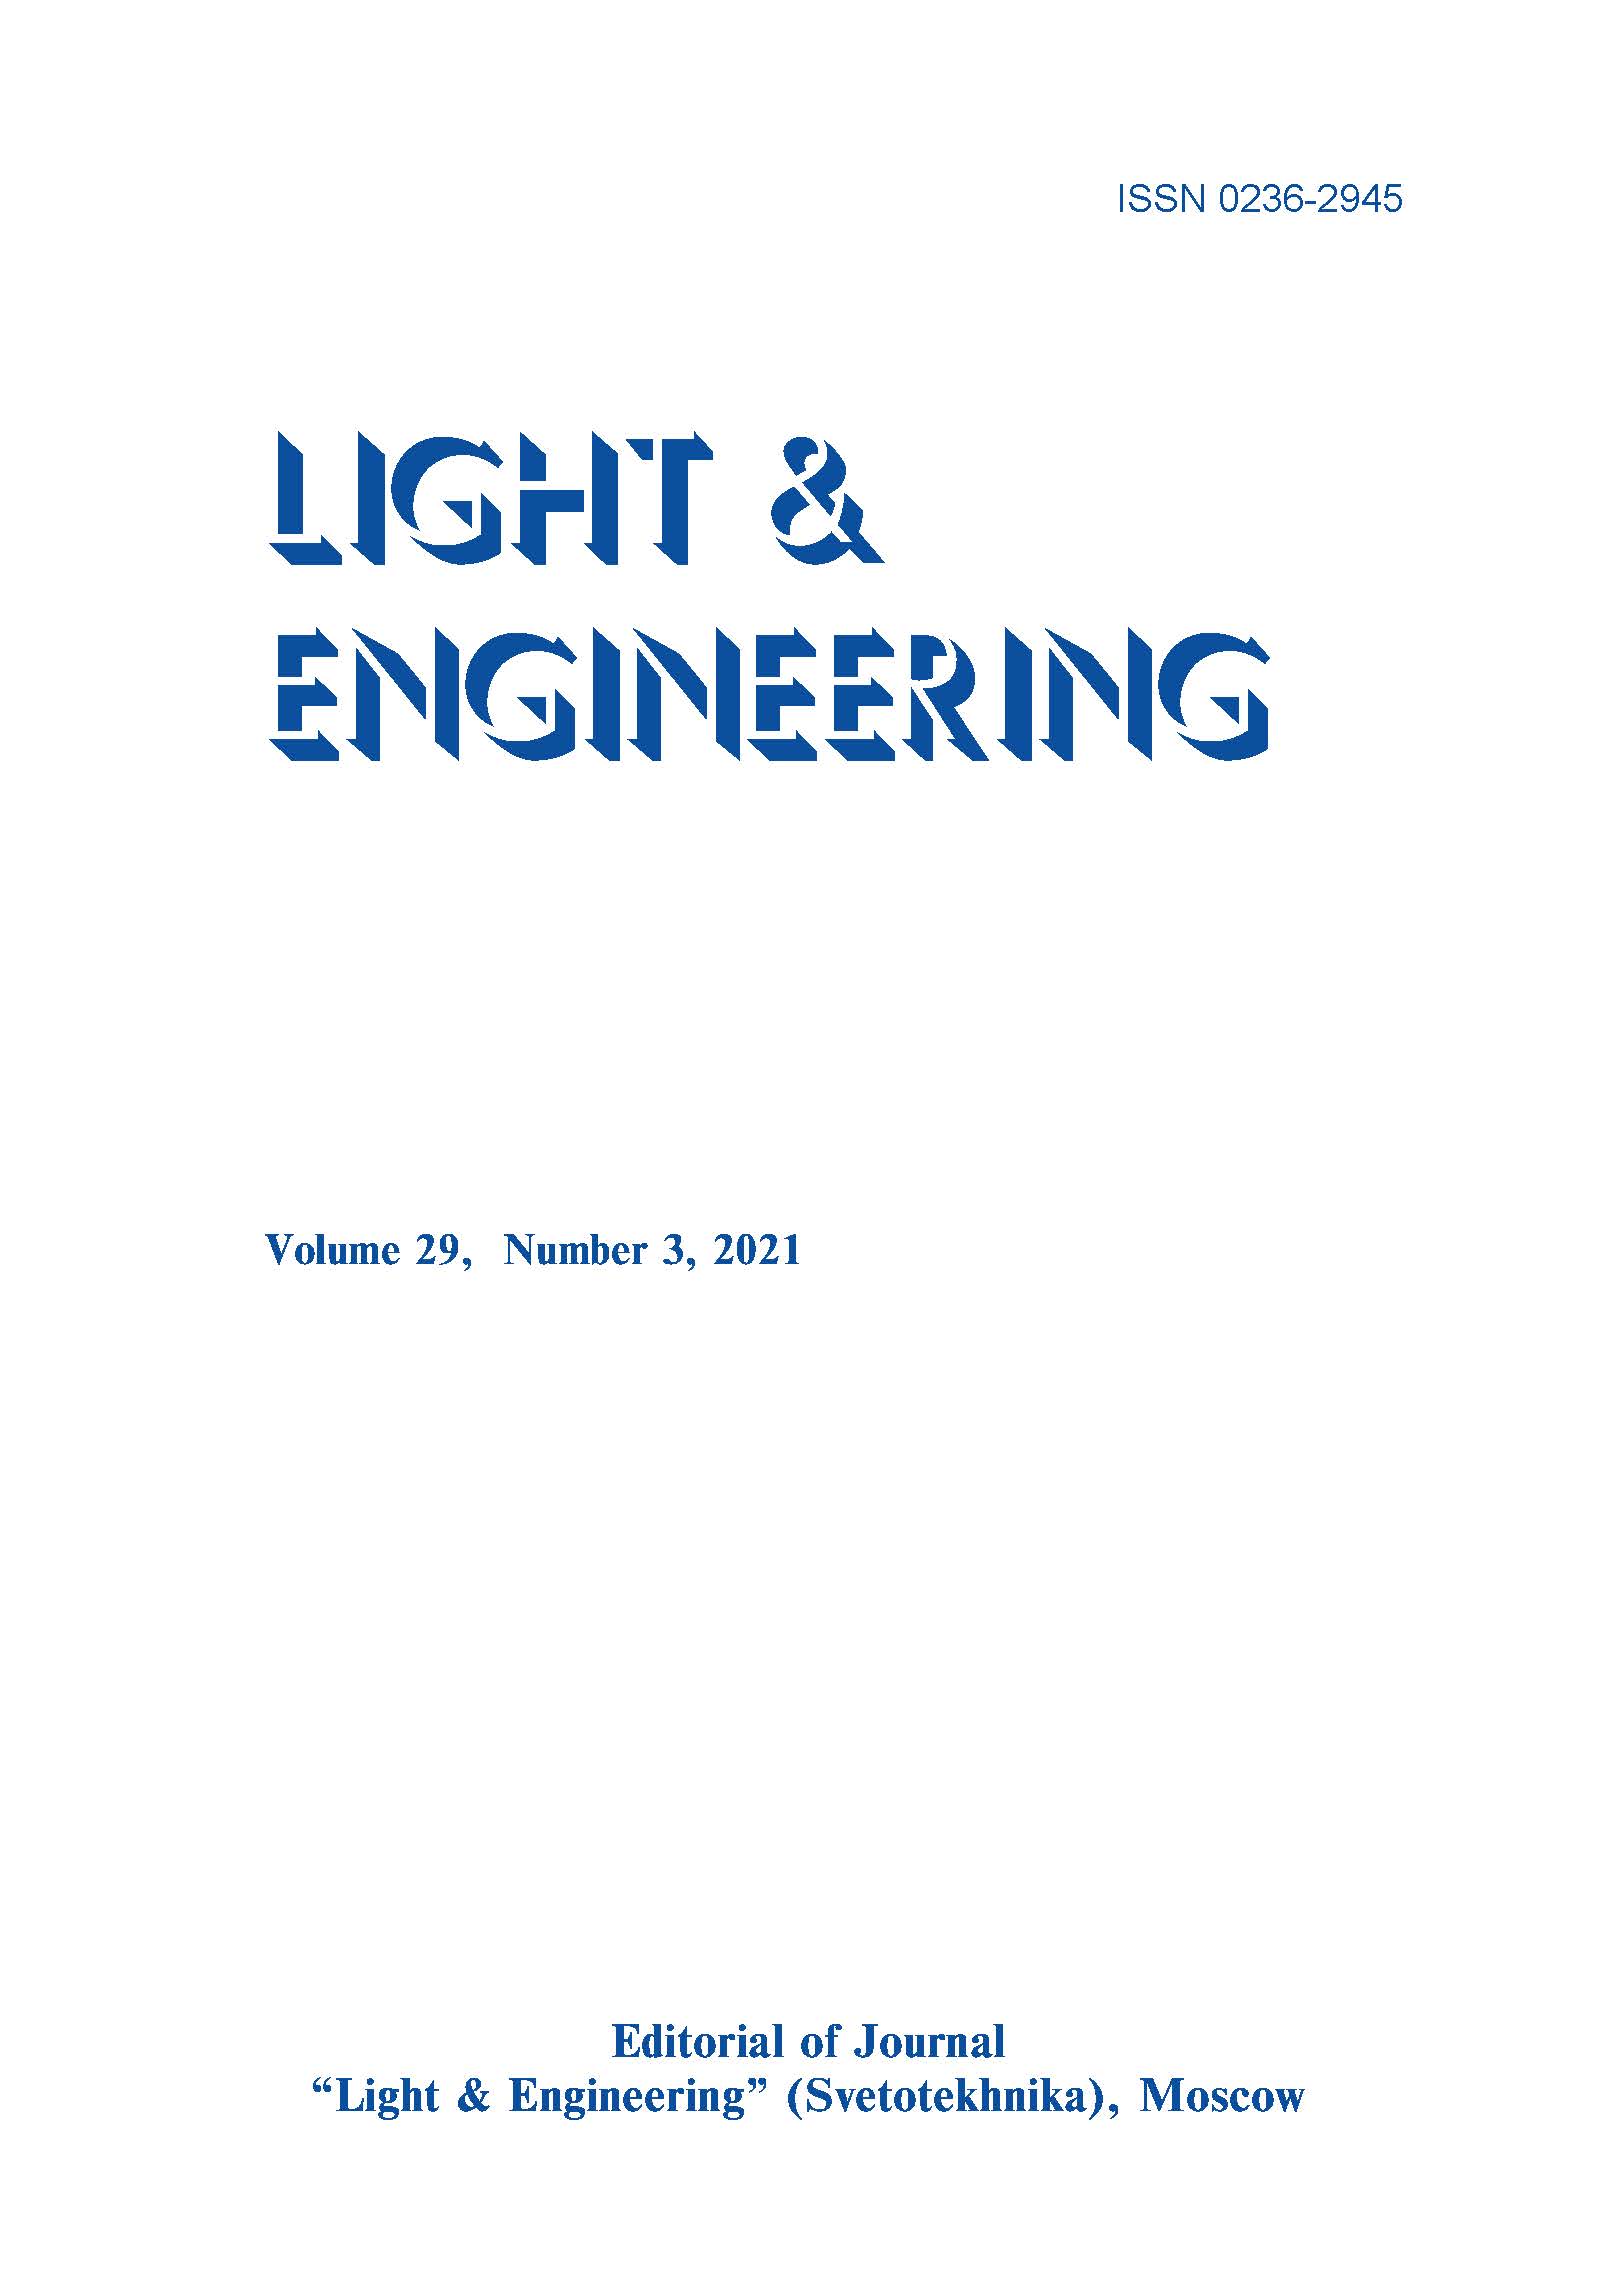 Software Library For The Lighting Fixtures Optical characteristics Calculation By The Computer-aided design System Kompas 3D L&E, Vol. 29, No. 3, 2021